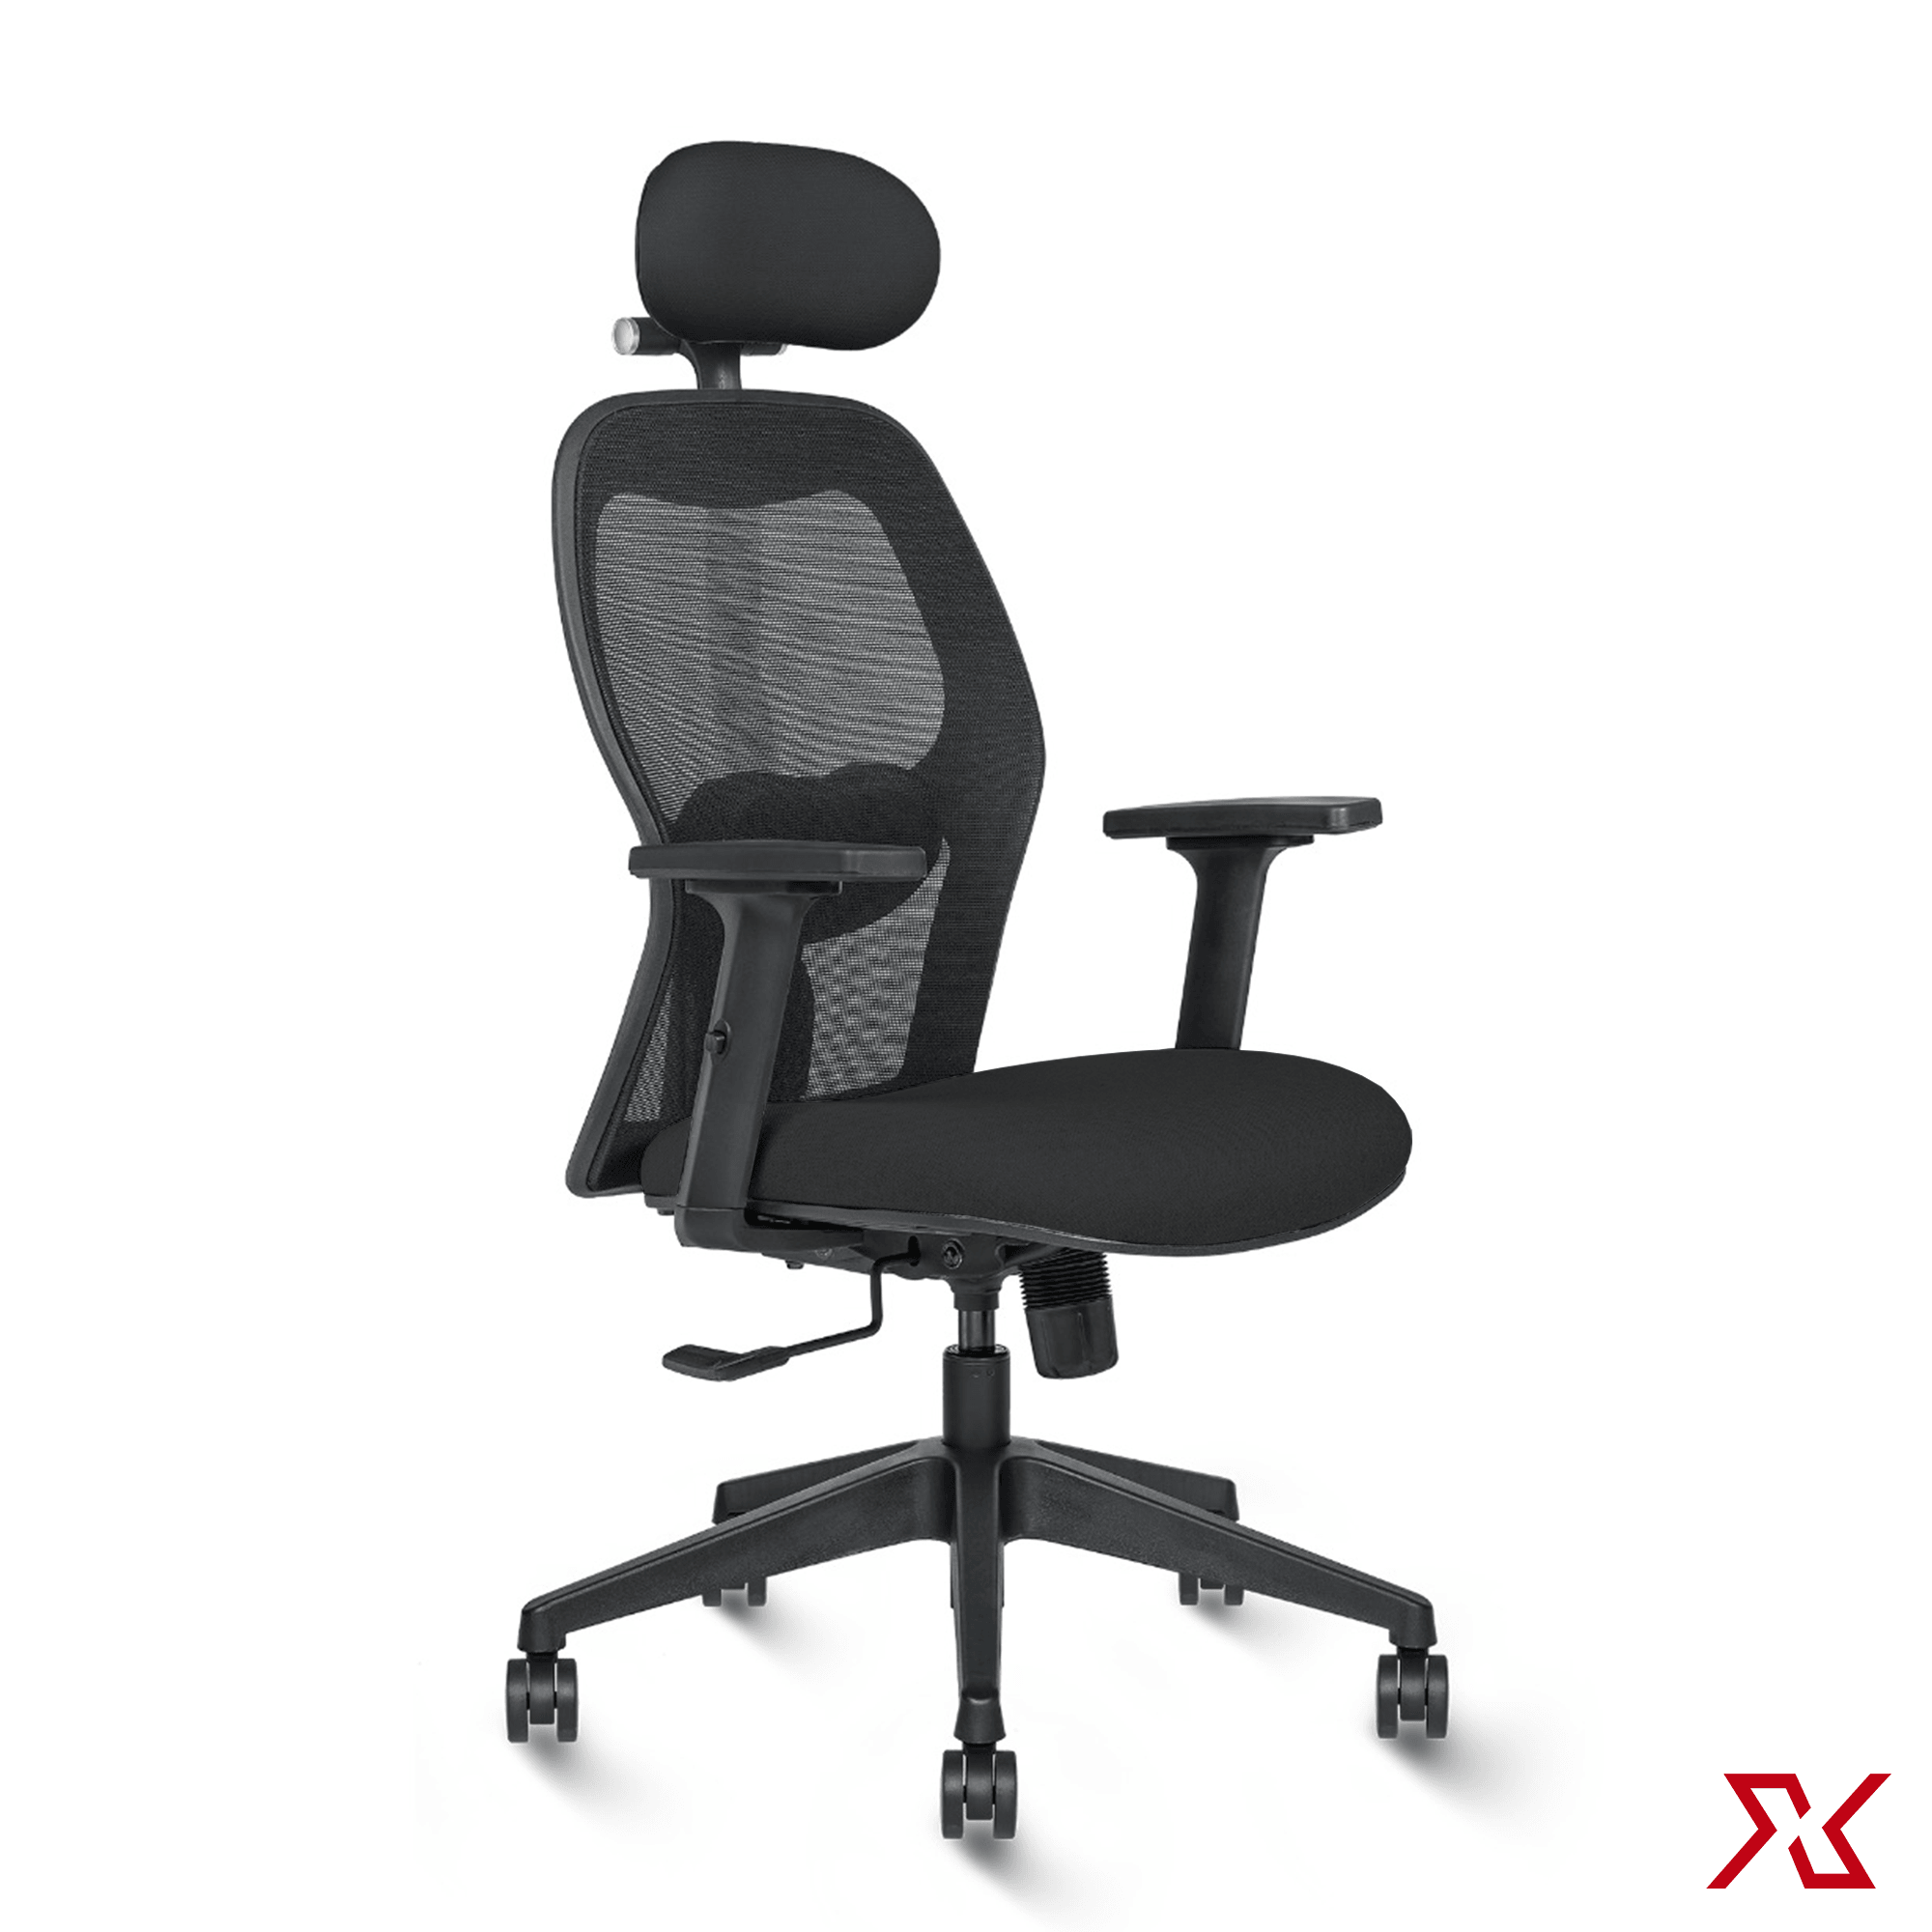 OSCAR High Back LX (Black Chair) - Exclusiff Seating Sytems